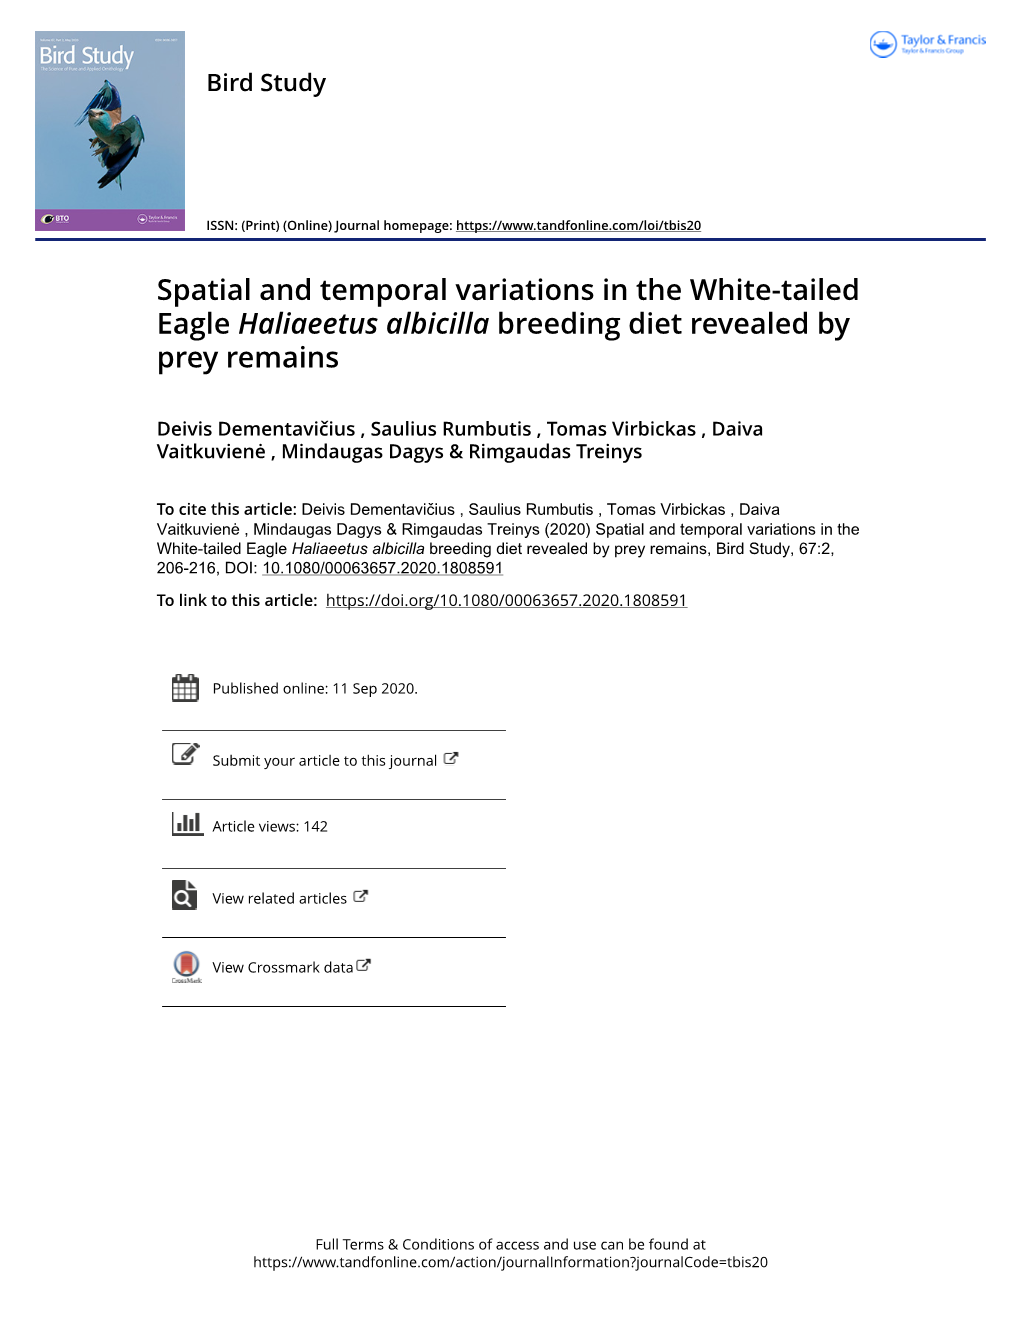 Spatial and Temporal Variations in the White-Tailed Eagle Haliaeetus Albicilla Breeding Diet Revealed by Prey Remains